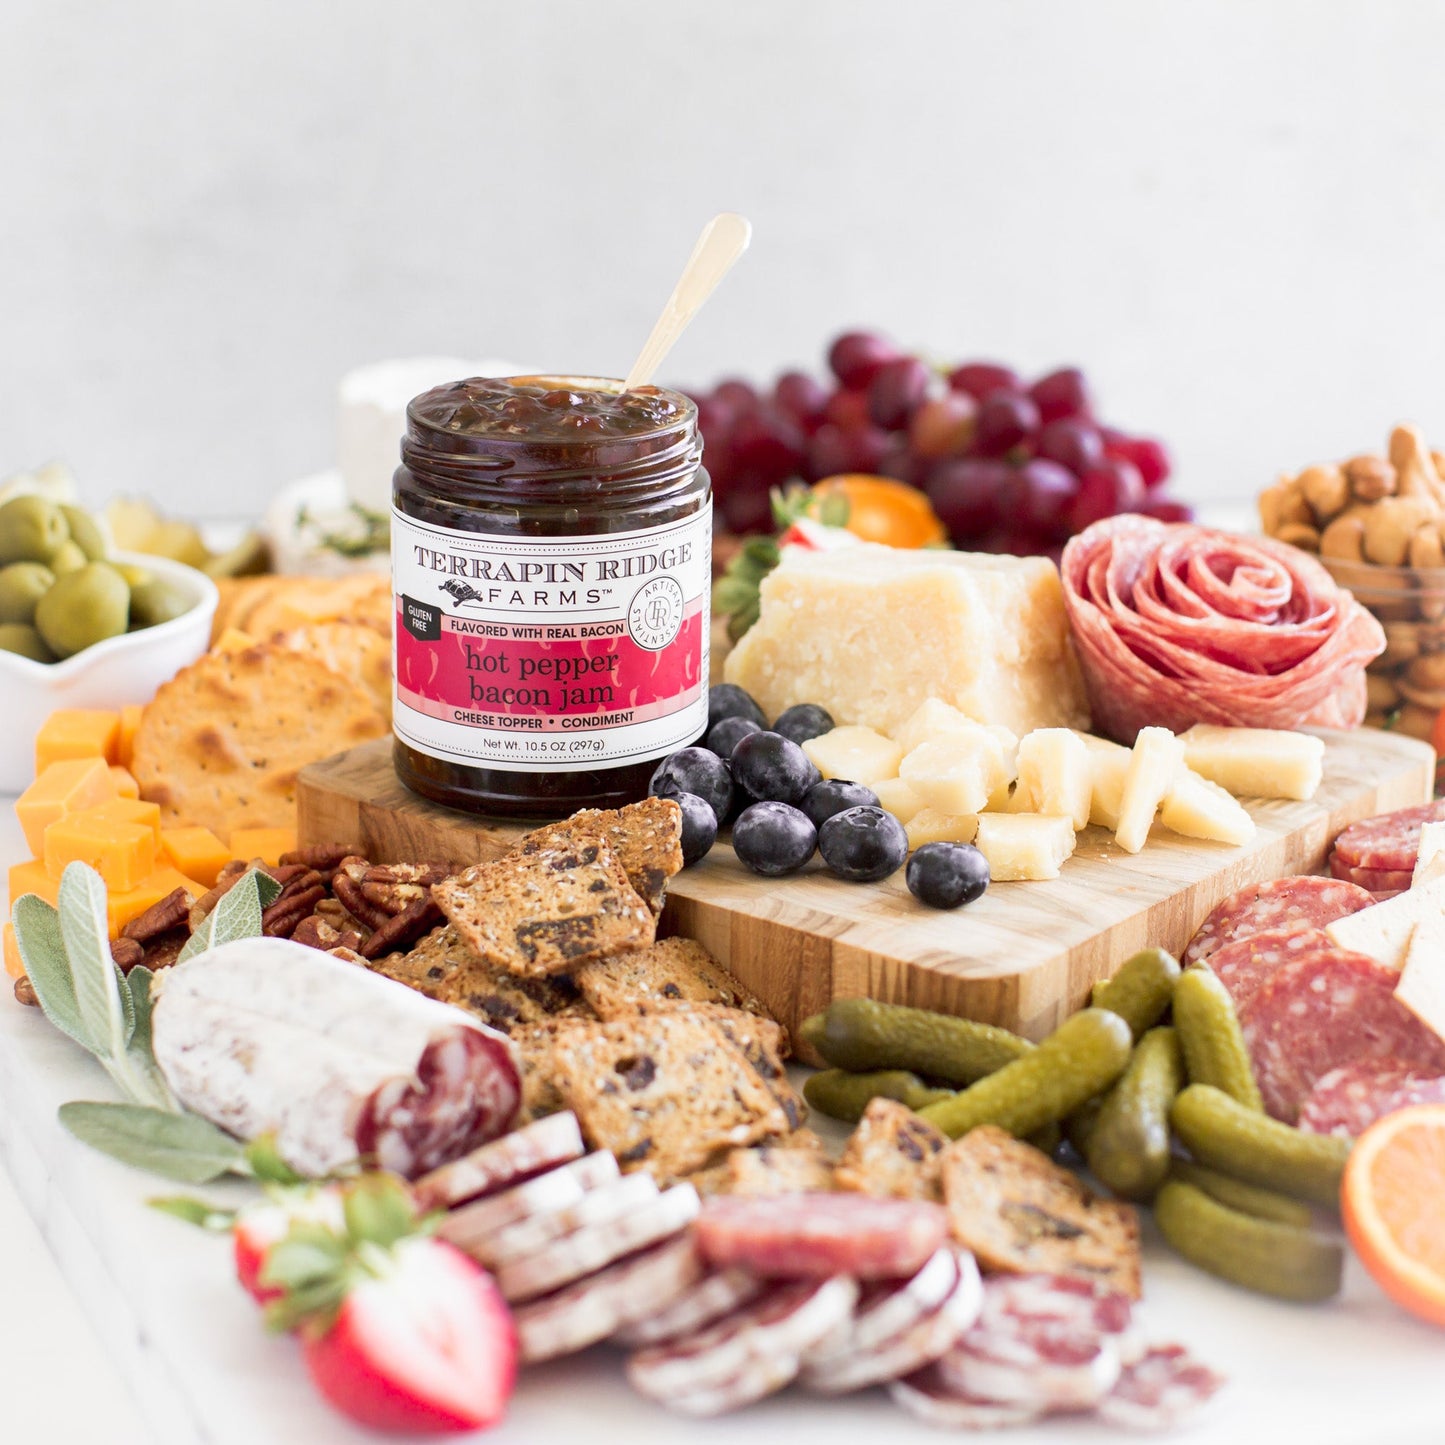 jar of Hot Pepper Bacon Jam on a board with meats, crackers, cheese, and fruits.